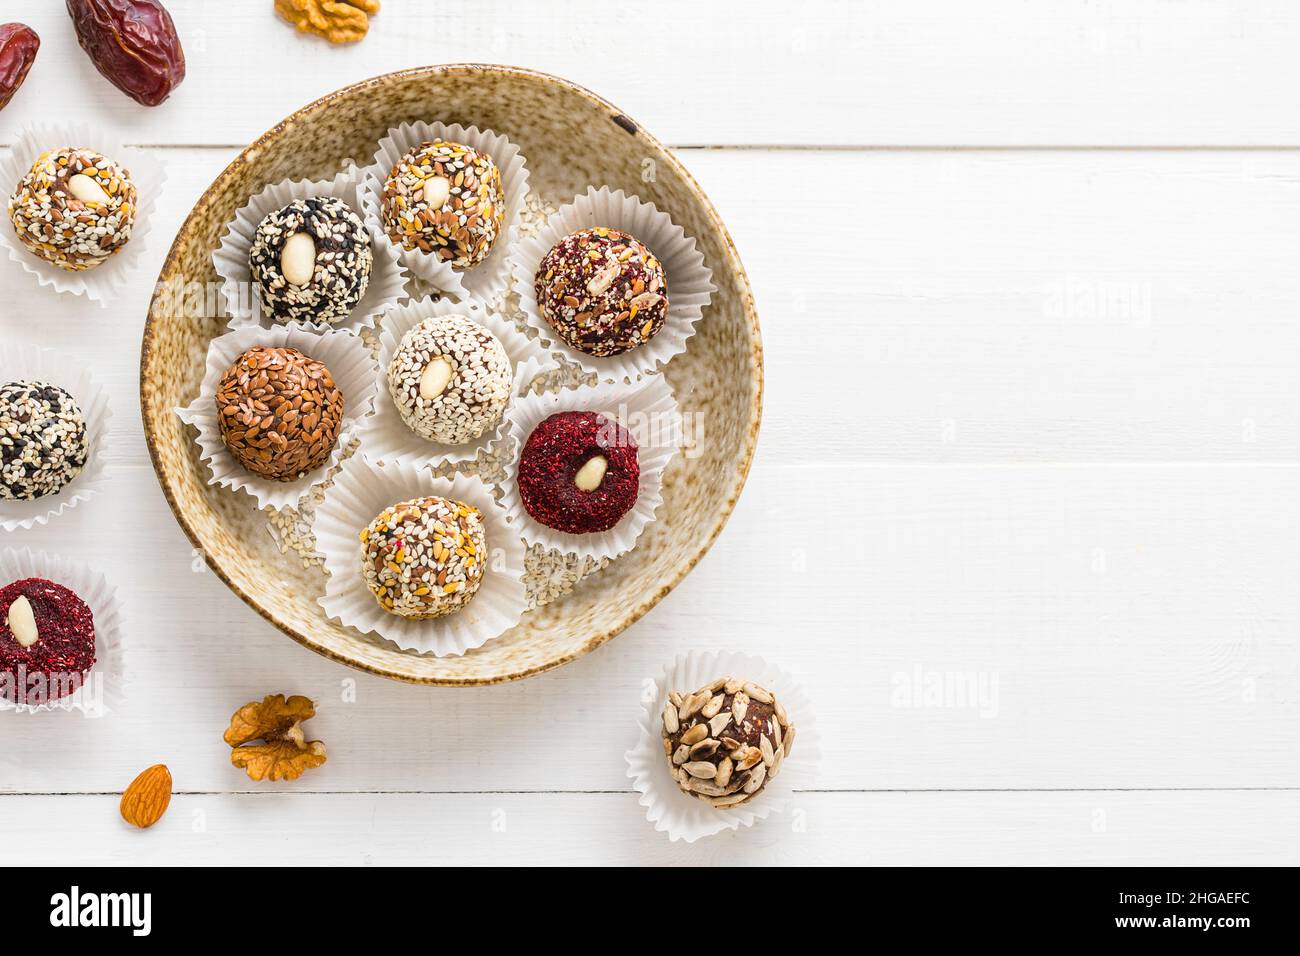 Vegan candies made from nuts and dried fruits. Energy ball. copy space Stock Photo